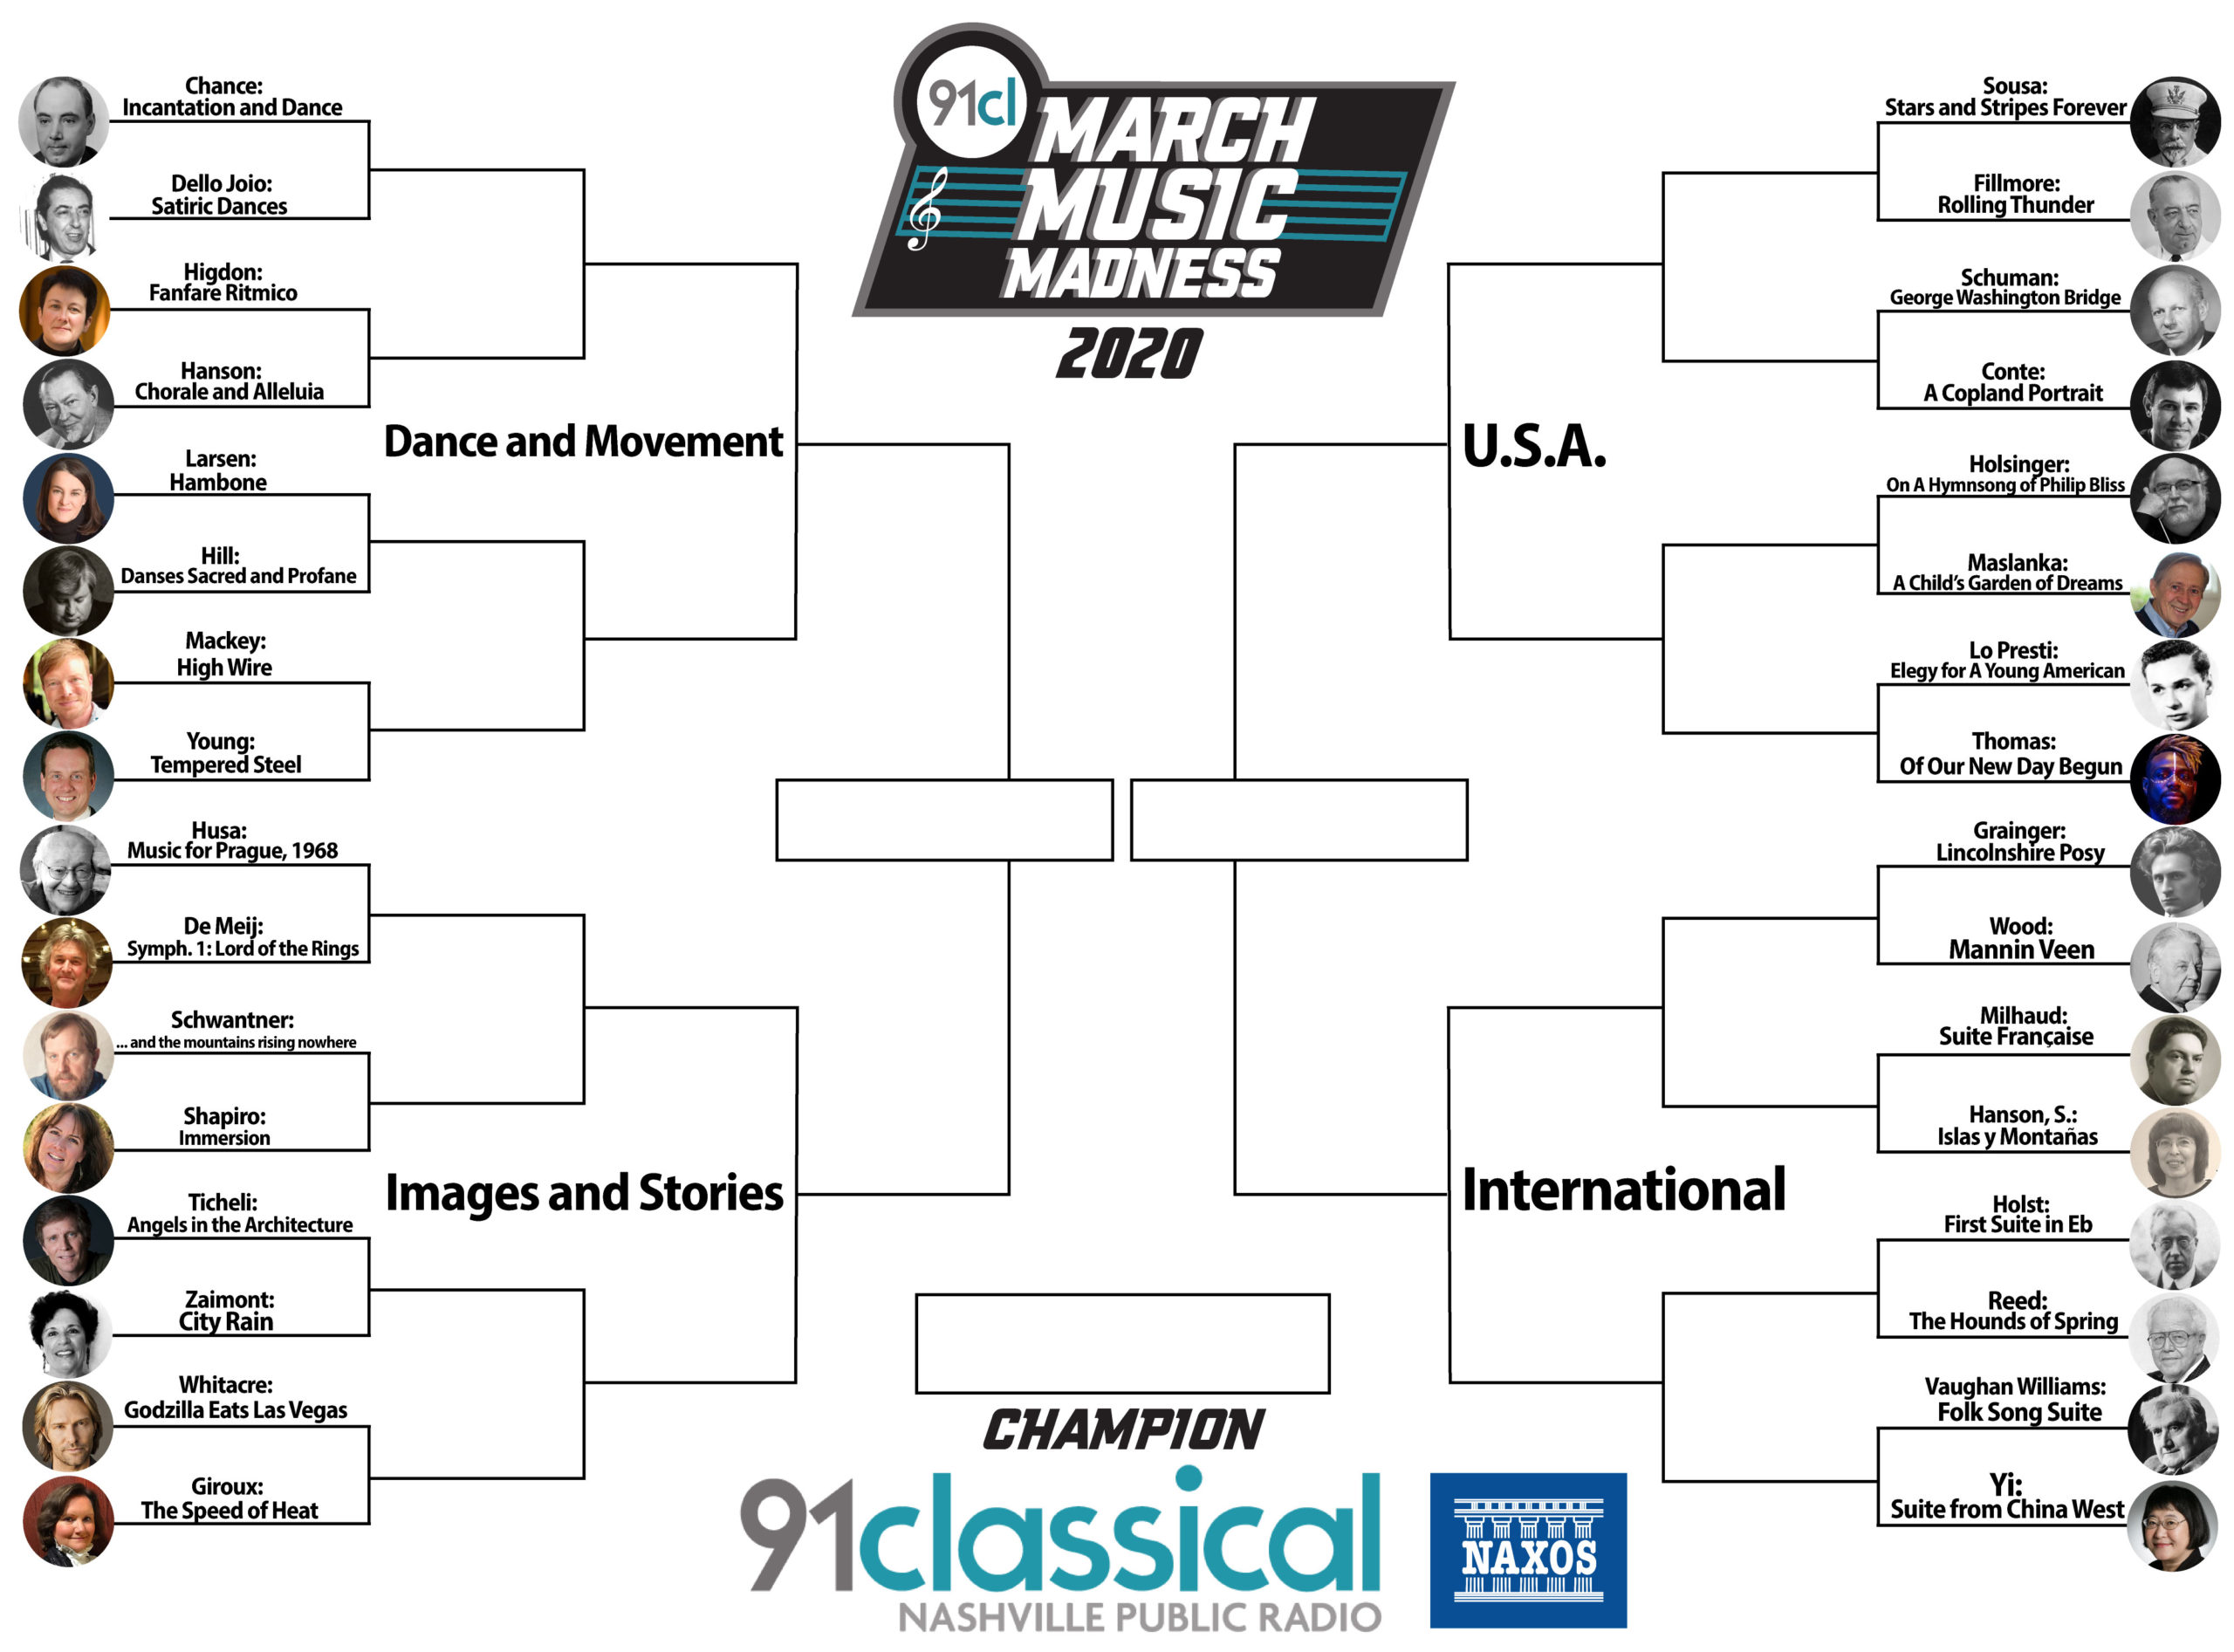 Make Your Picks In Our Second Annual March Music Madness Nashville